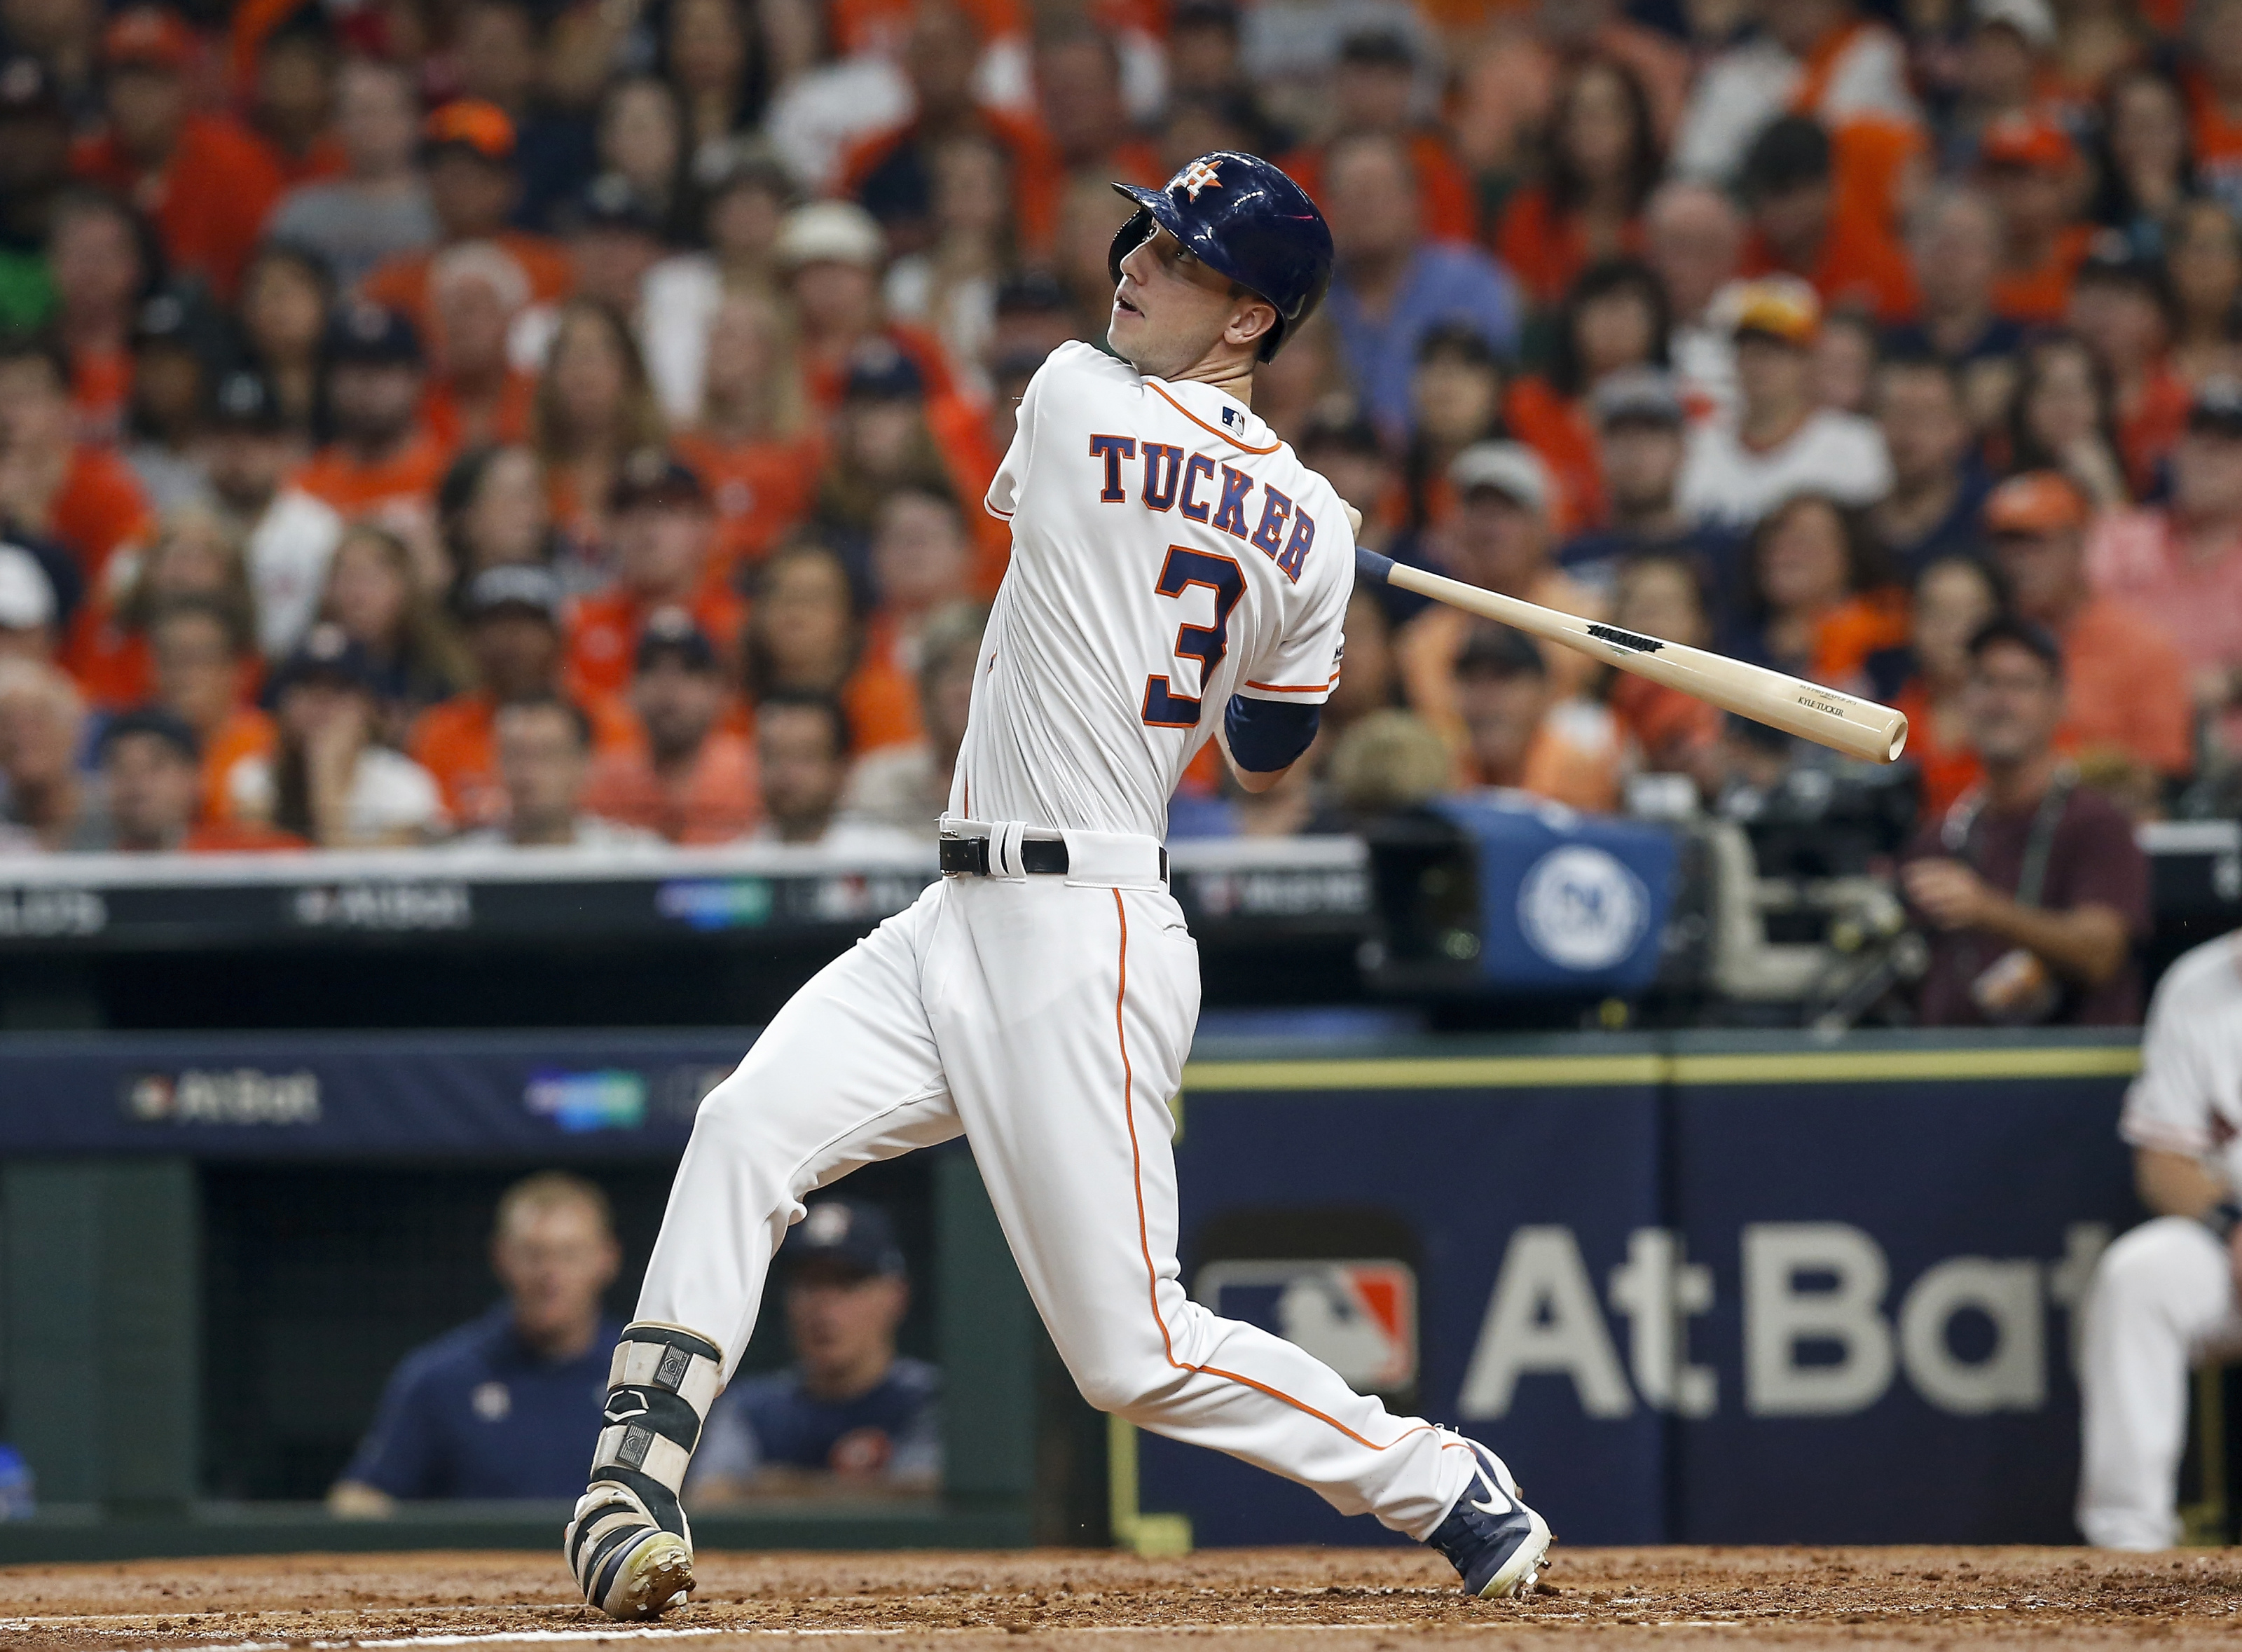 Houston Astros' Kyle Tucker named American League Player of the